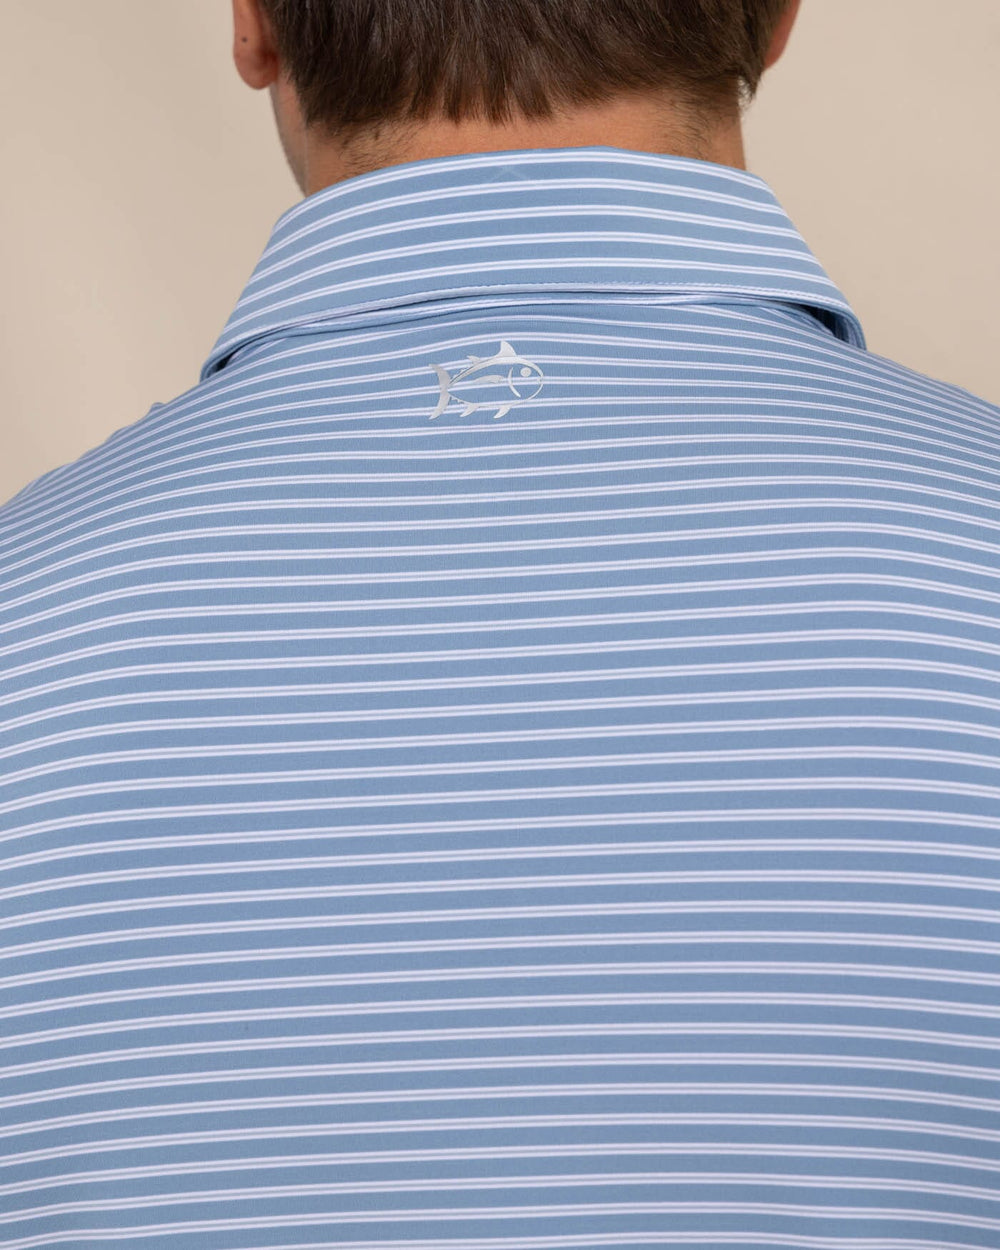 The detail view of the Southern Tide brrr eeze Beattie Stripe Performance Polo by Southern Tide - Windward Blue